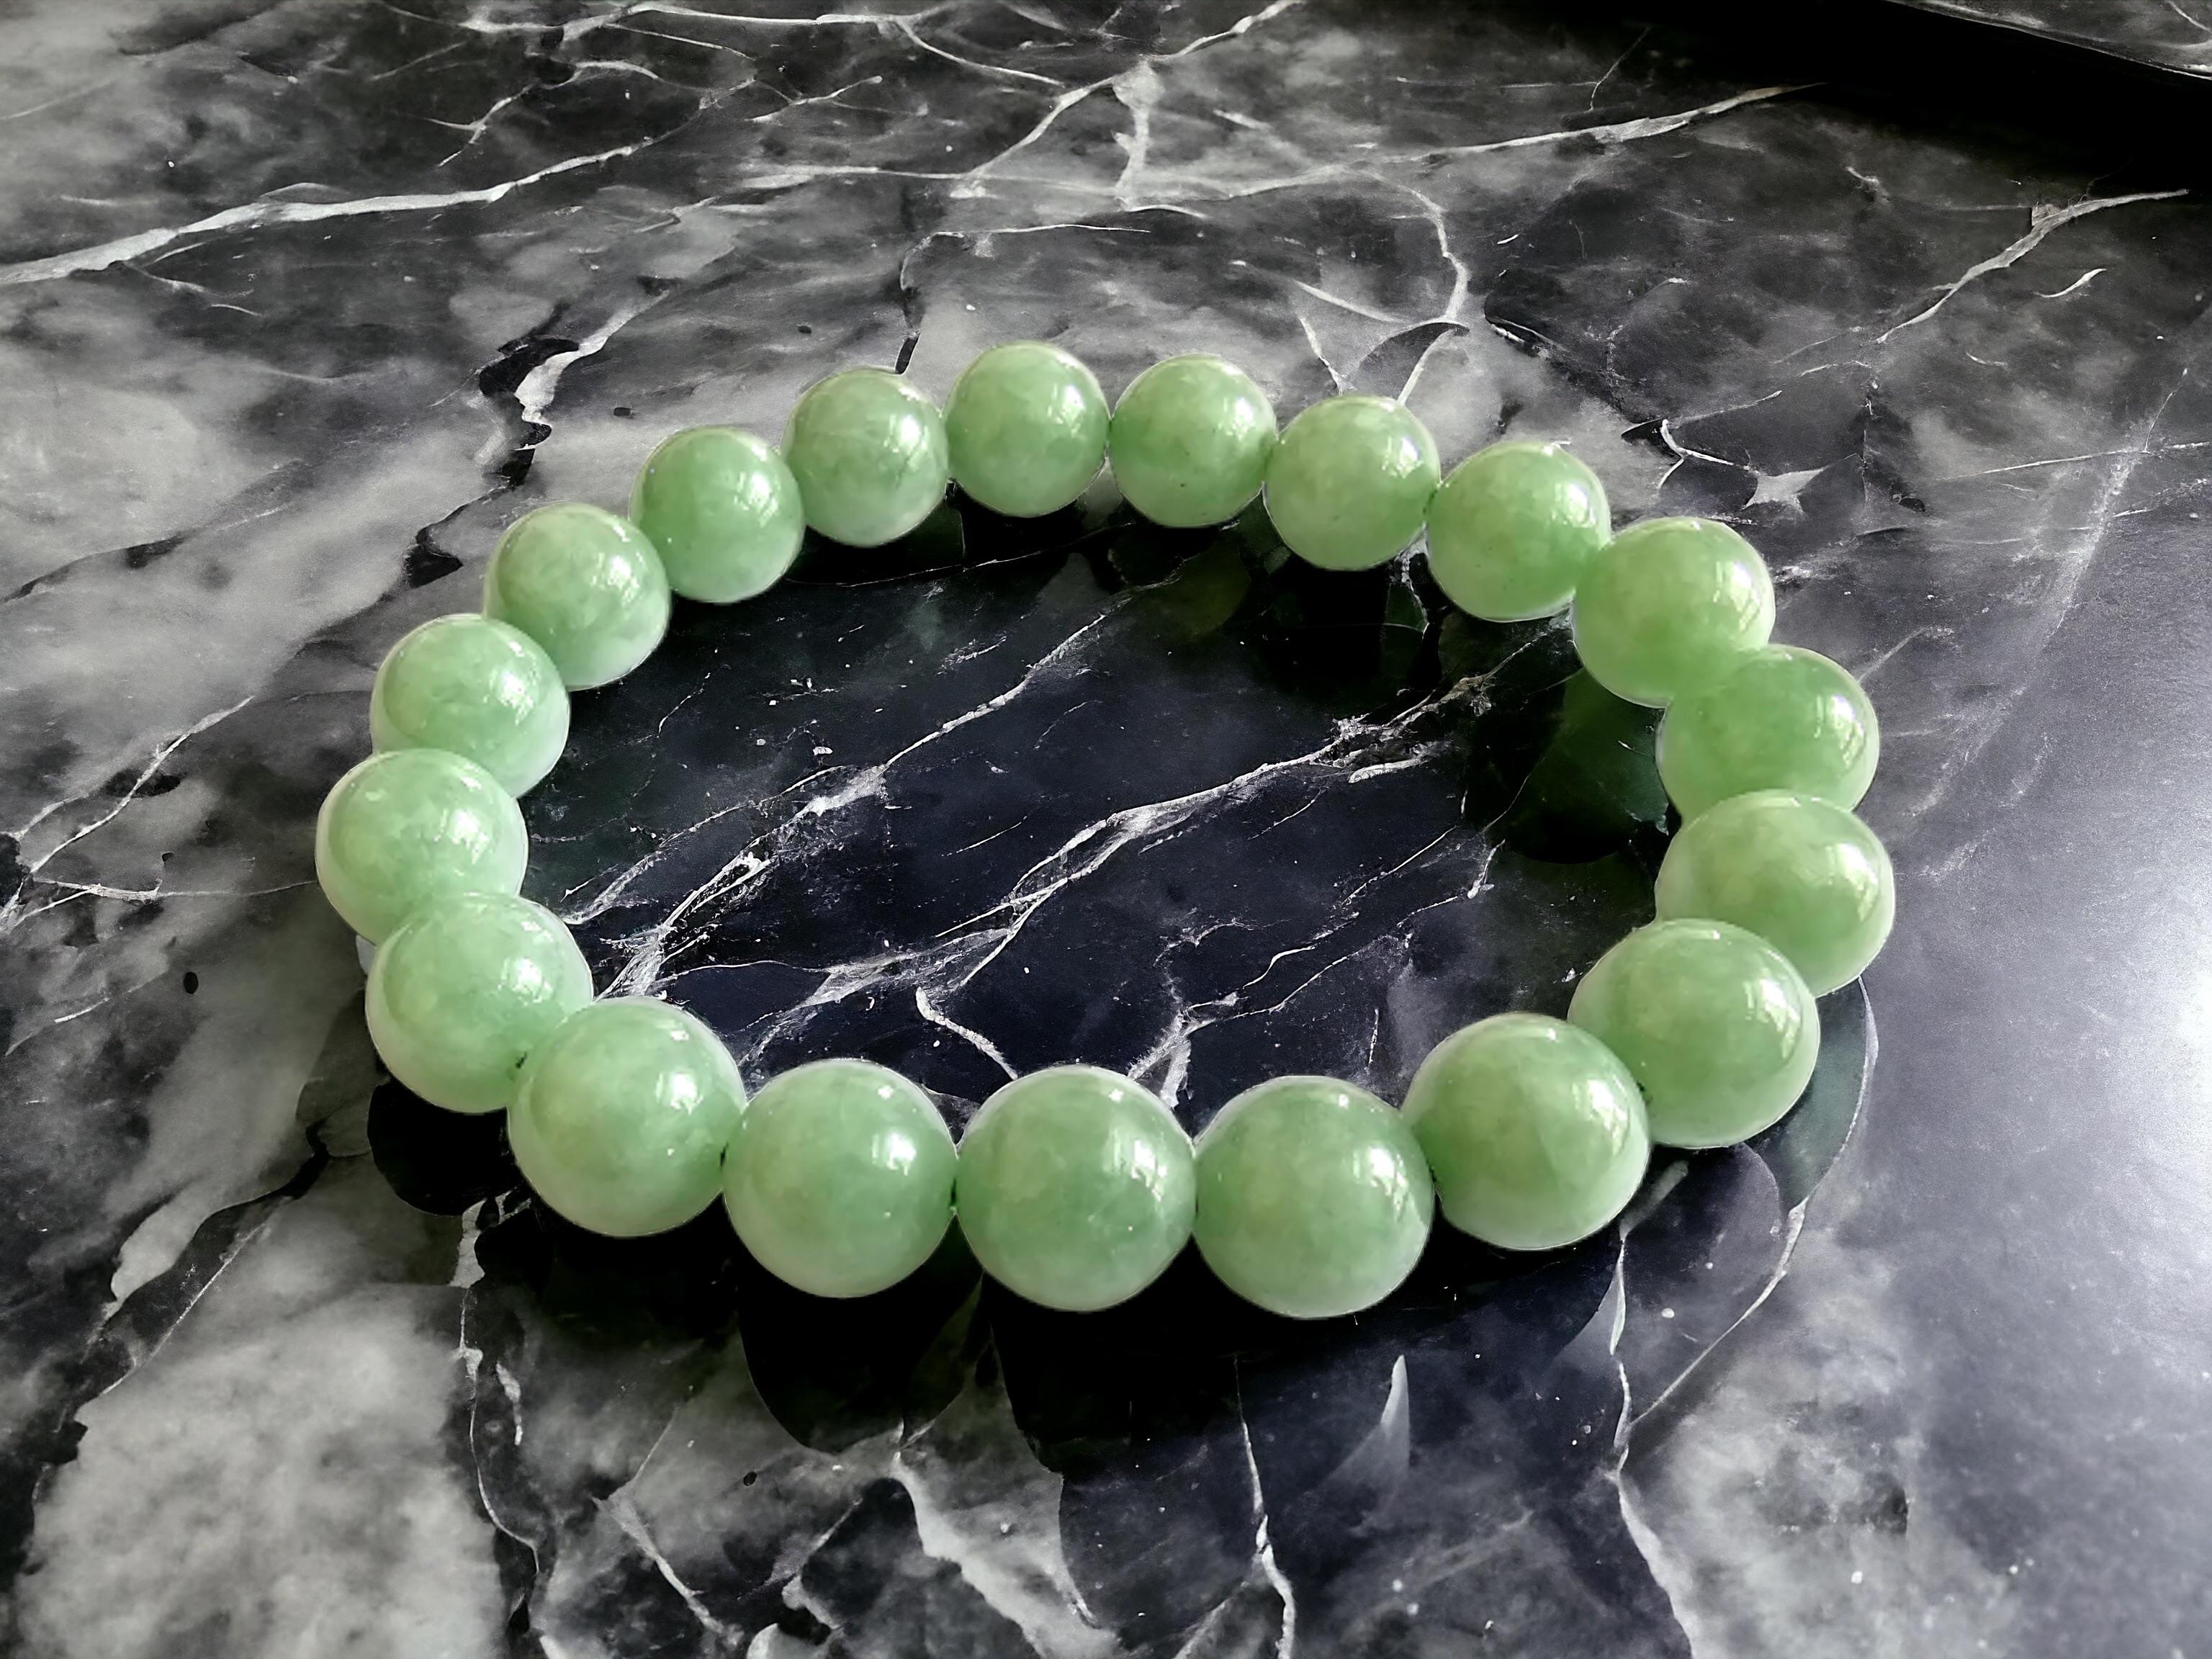 Imperial Green Burmese A-Jade Jadeite Beaded Bracelet (10mm Each x 19 beads) 05003

10mm each, 19 perfectly calibrated Green Jadeite Beads. Some of the rarest naturally occurring hues of A-Jadeite, calibrated Green creates a visually stunning